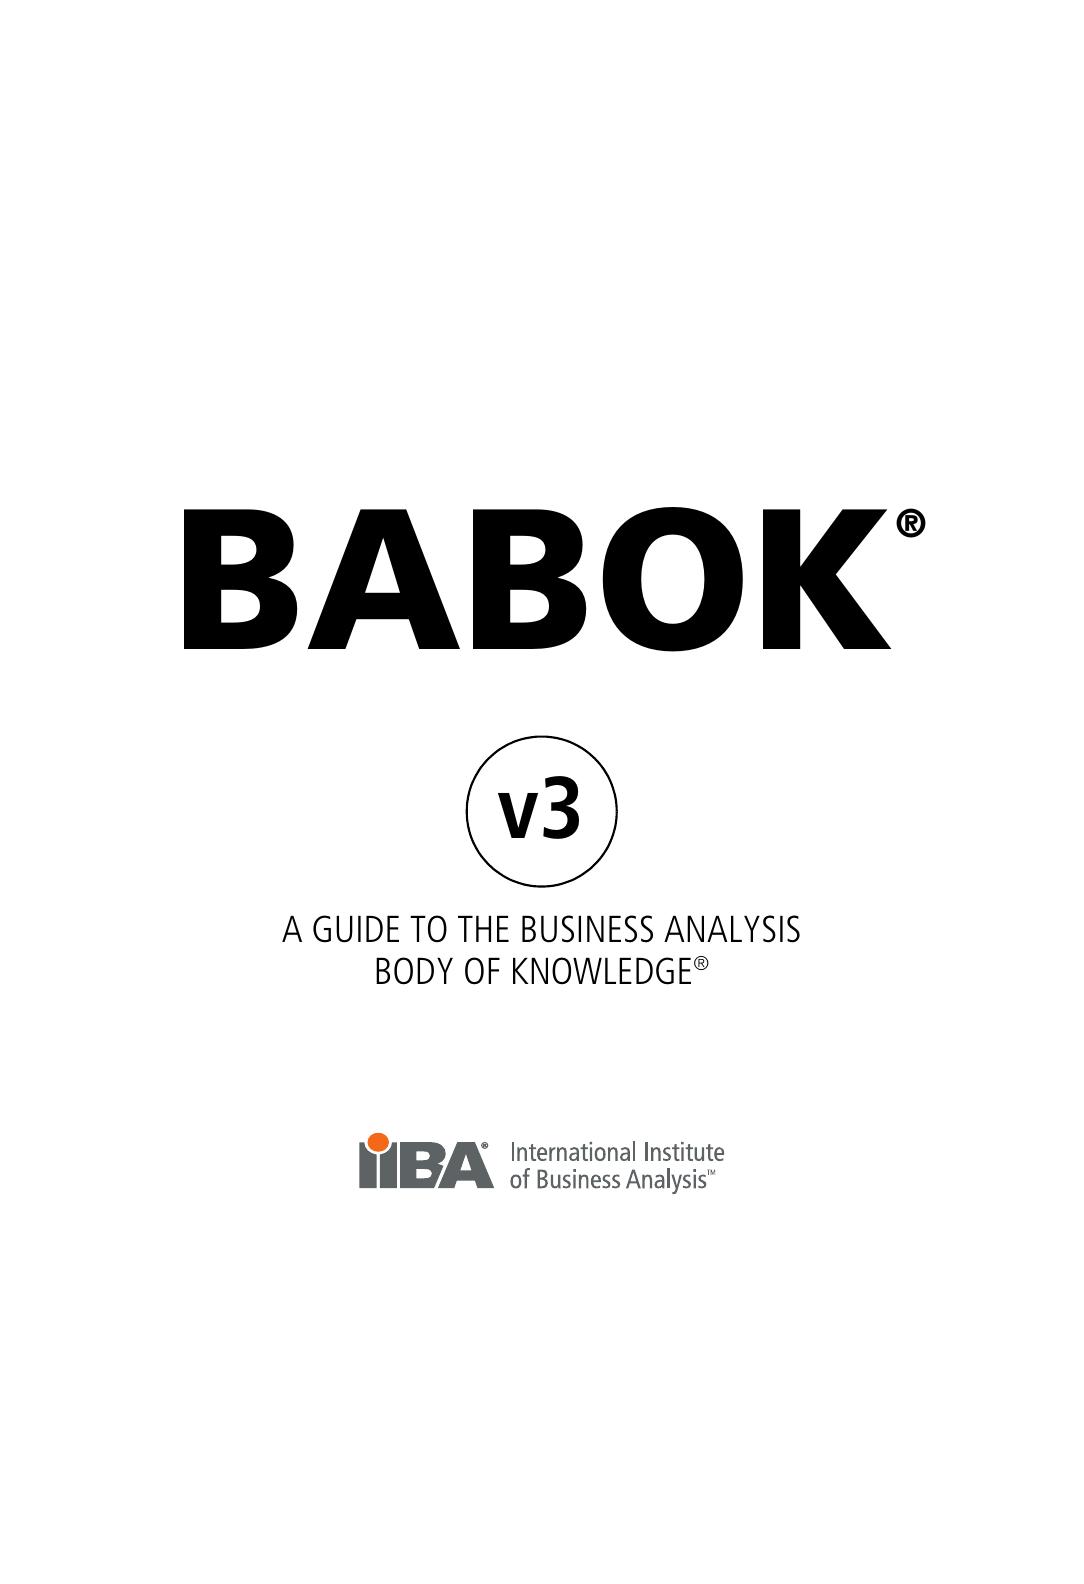 BABOK v3 A Guide to the Business Analysis Body of Knowledge by IIBA